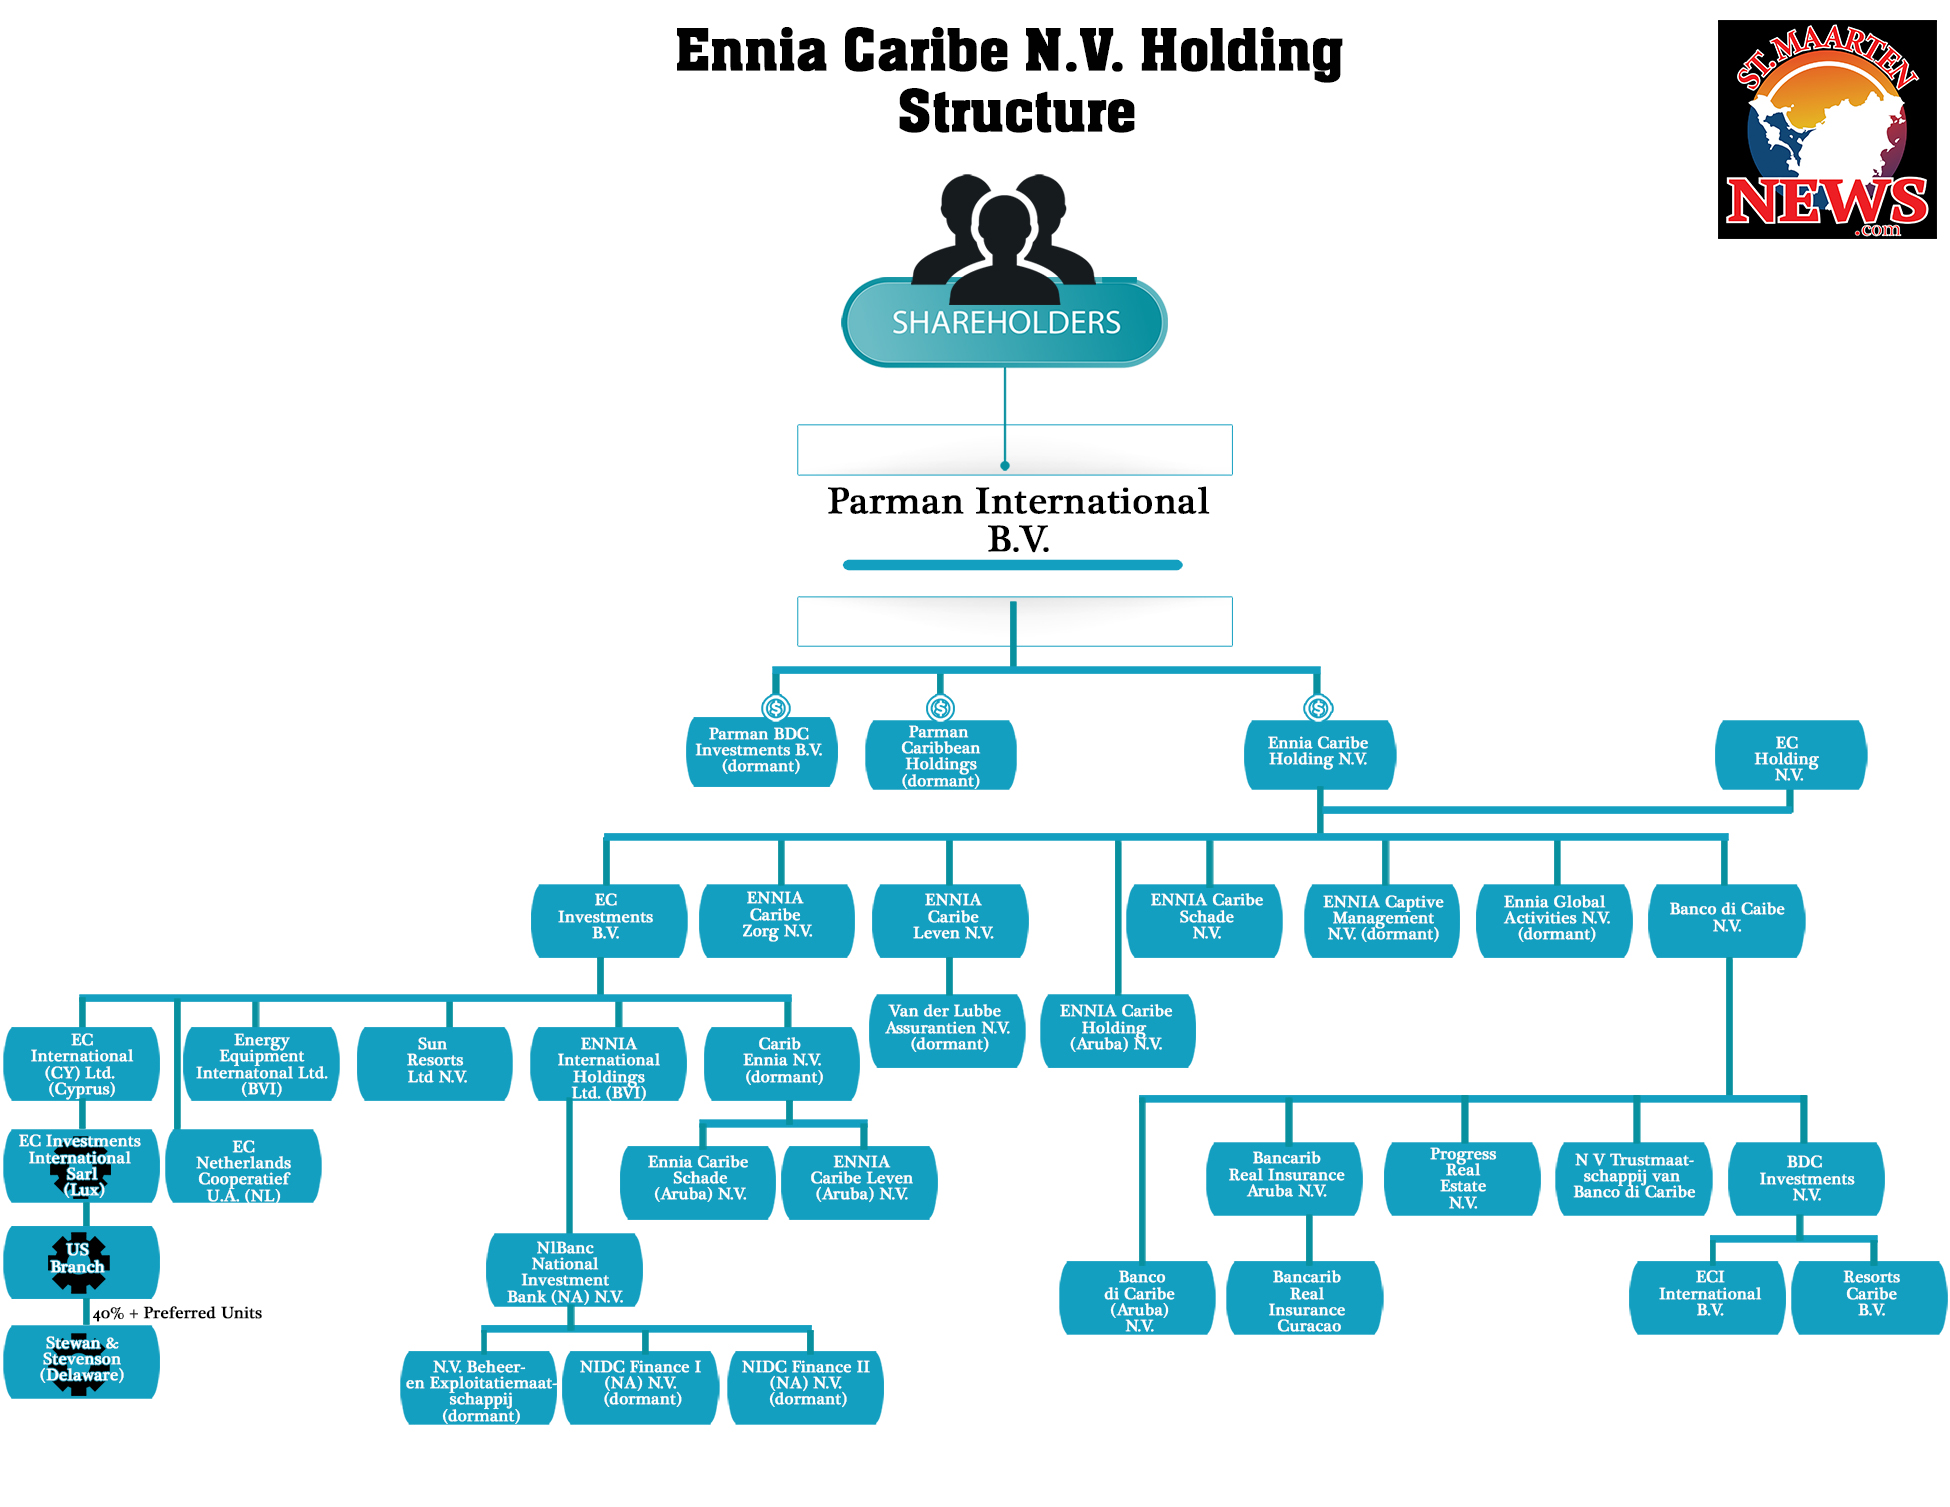 Company Holding Structure ENNIA